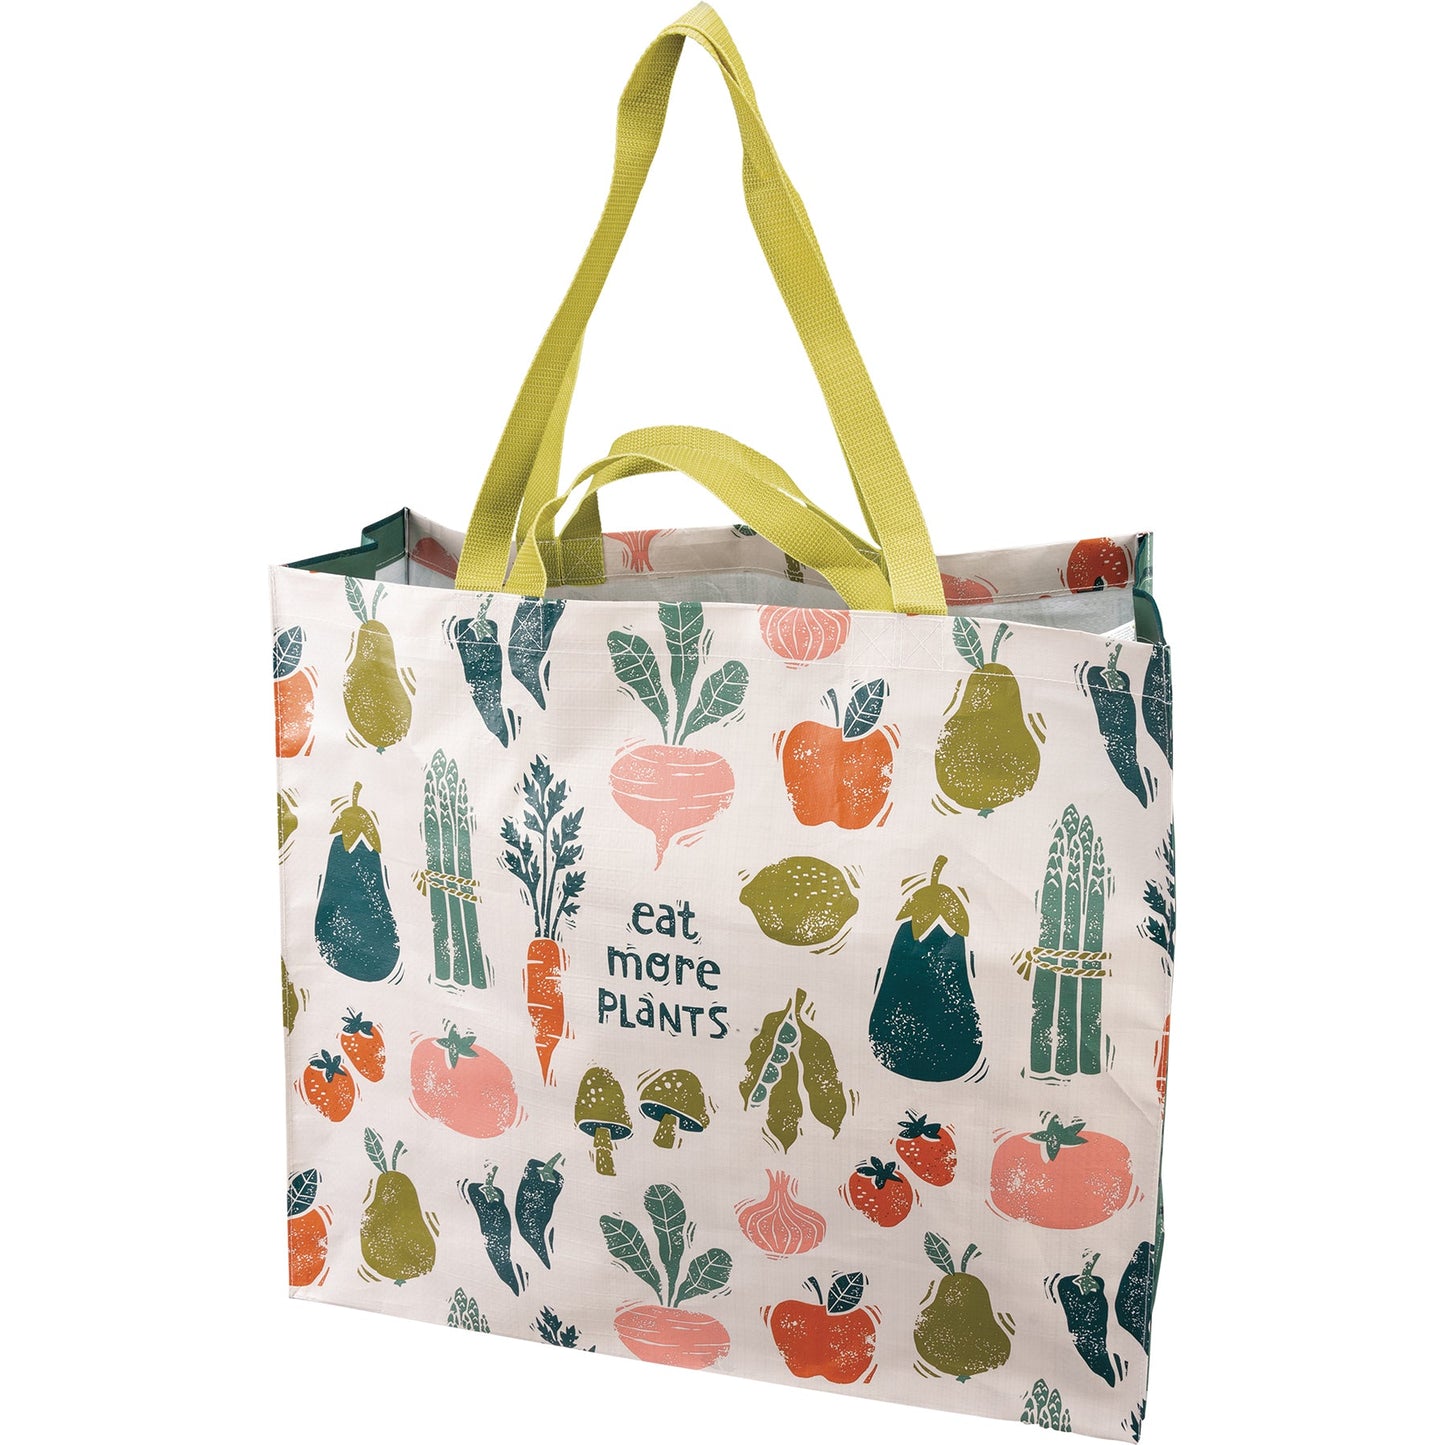 Eat More Plants Shopping Tote | Extra Large Market Eco Bag | 19.50" x 17.50" x 7"